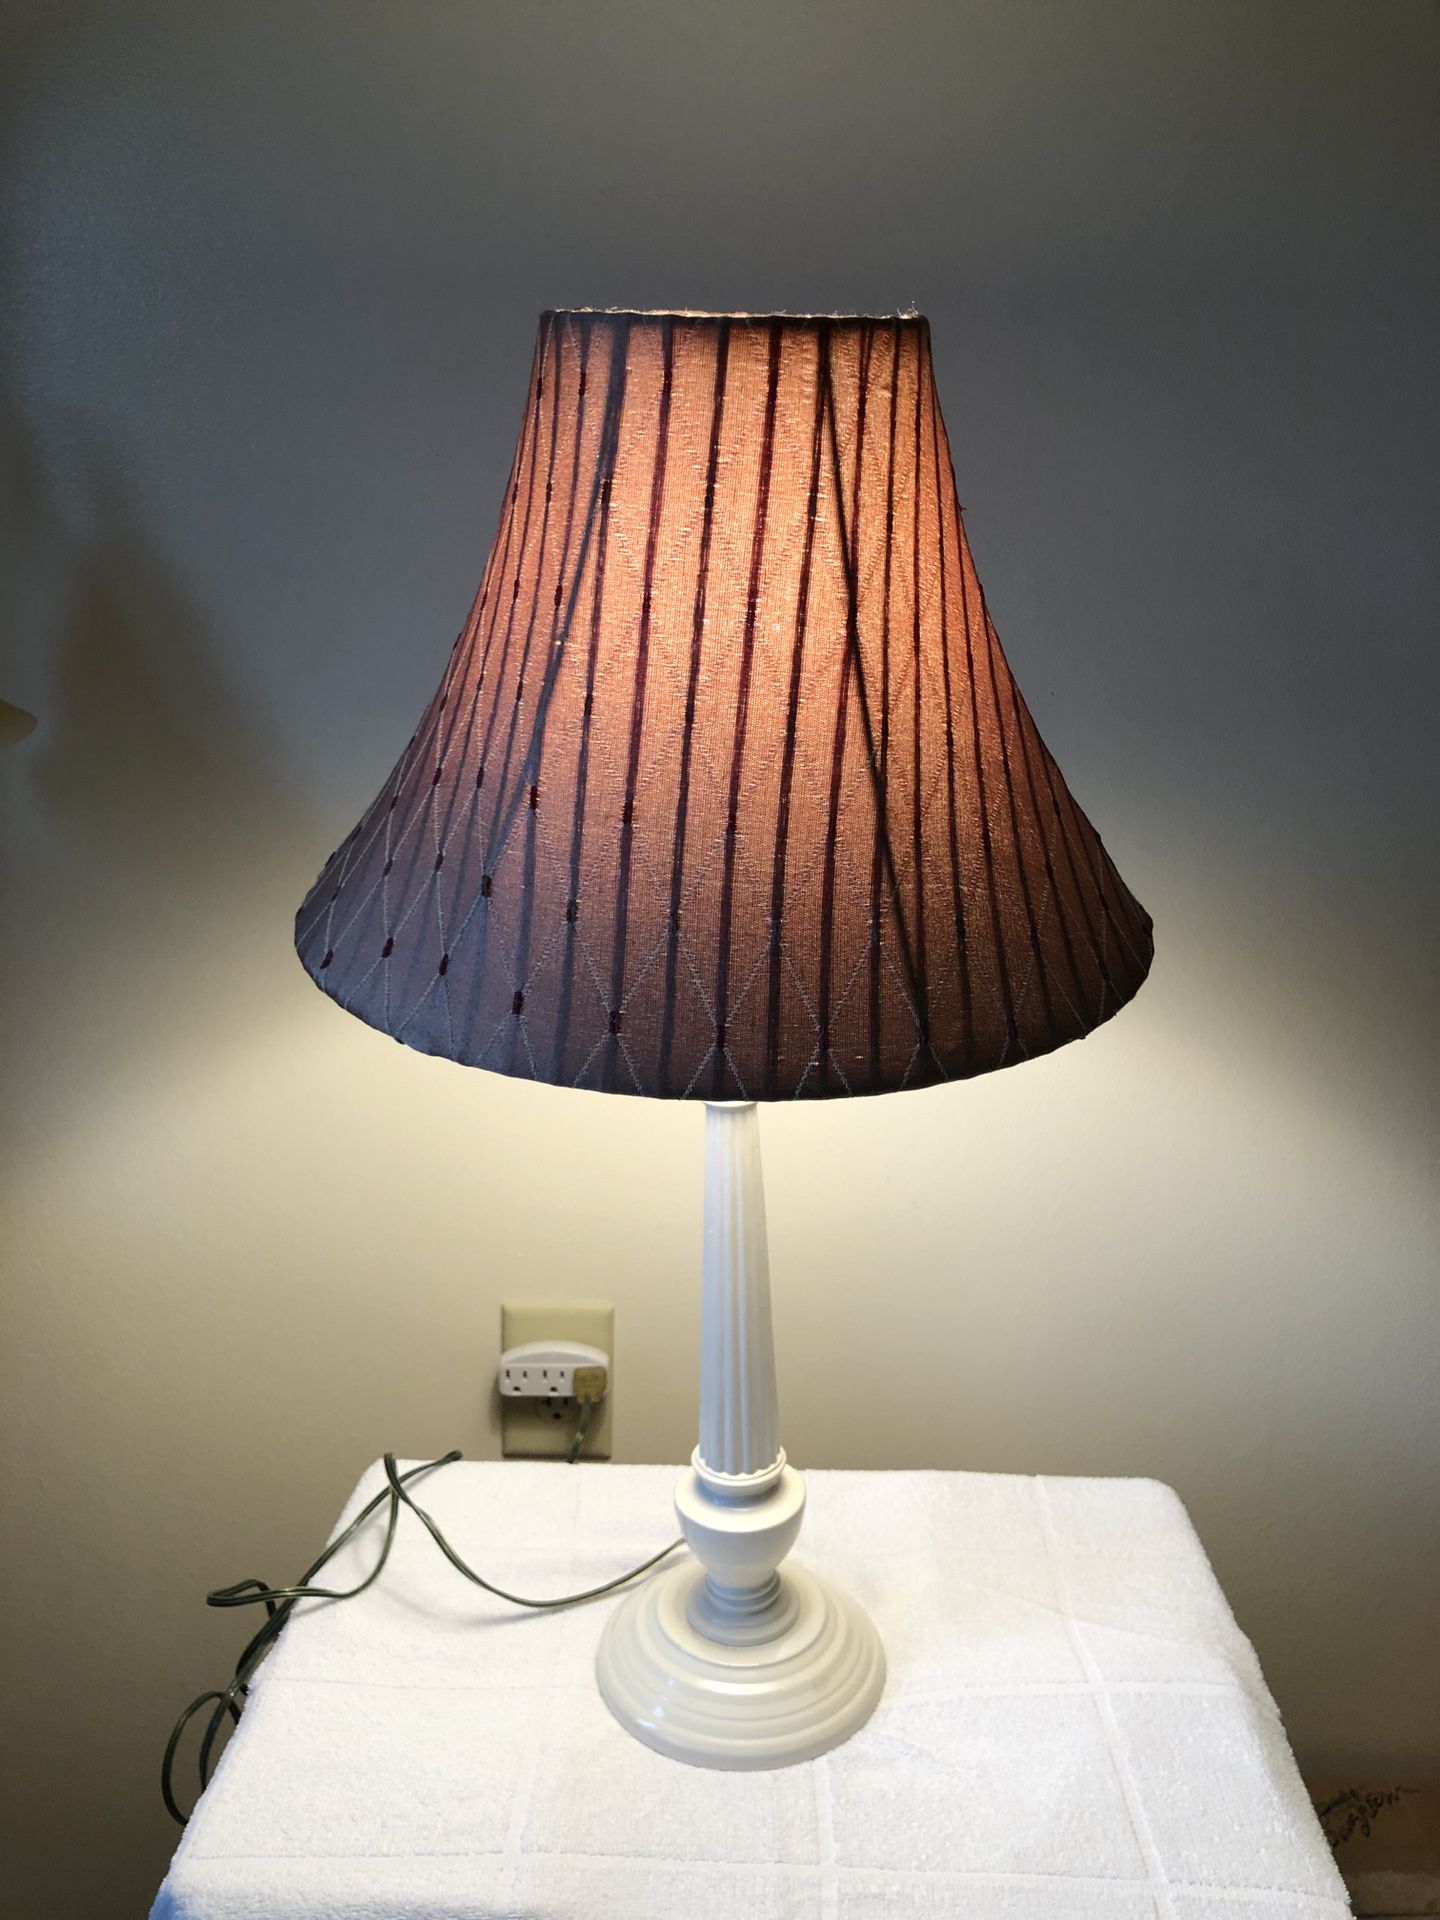 26” Ivory Porcelain Enamel Lamp and Fabric Shade by Alsy